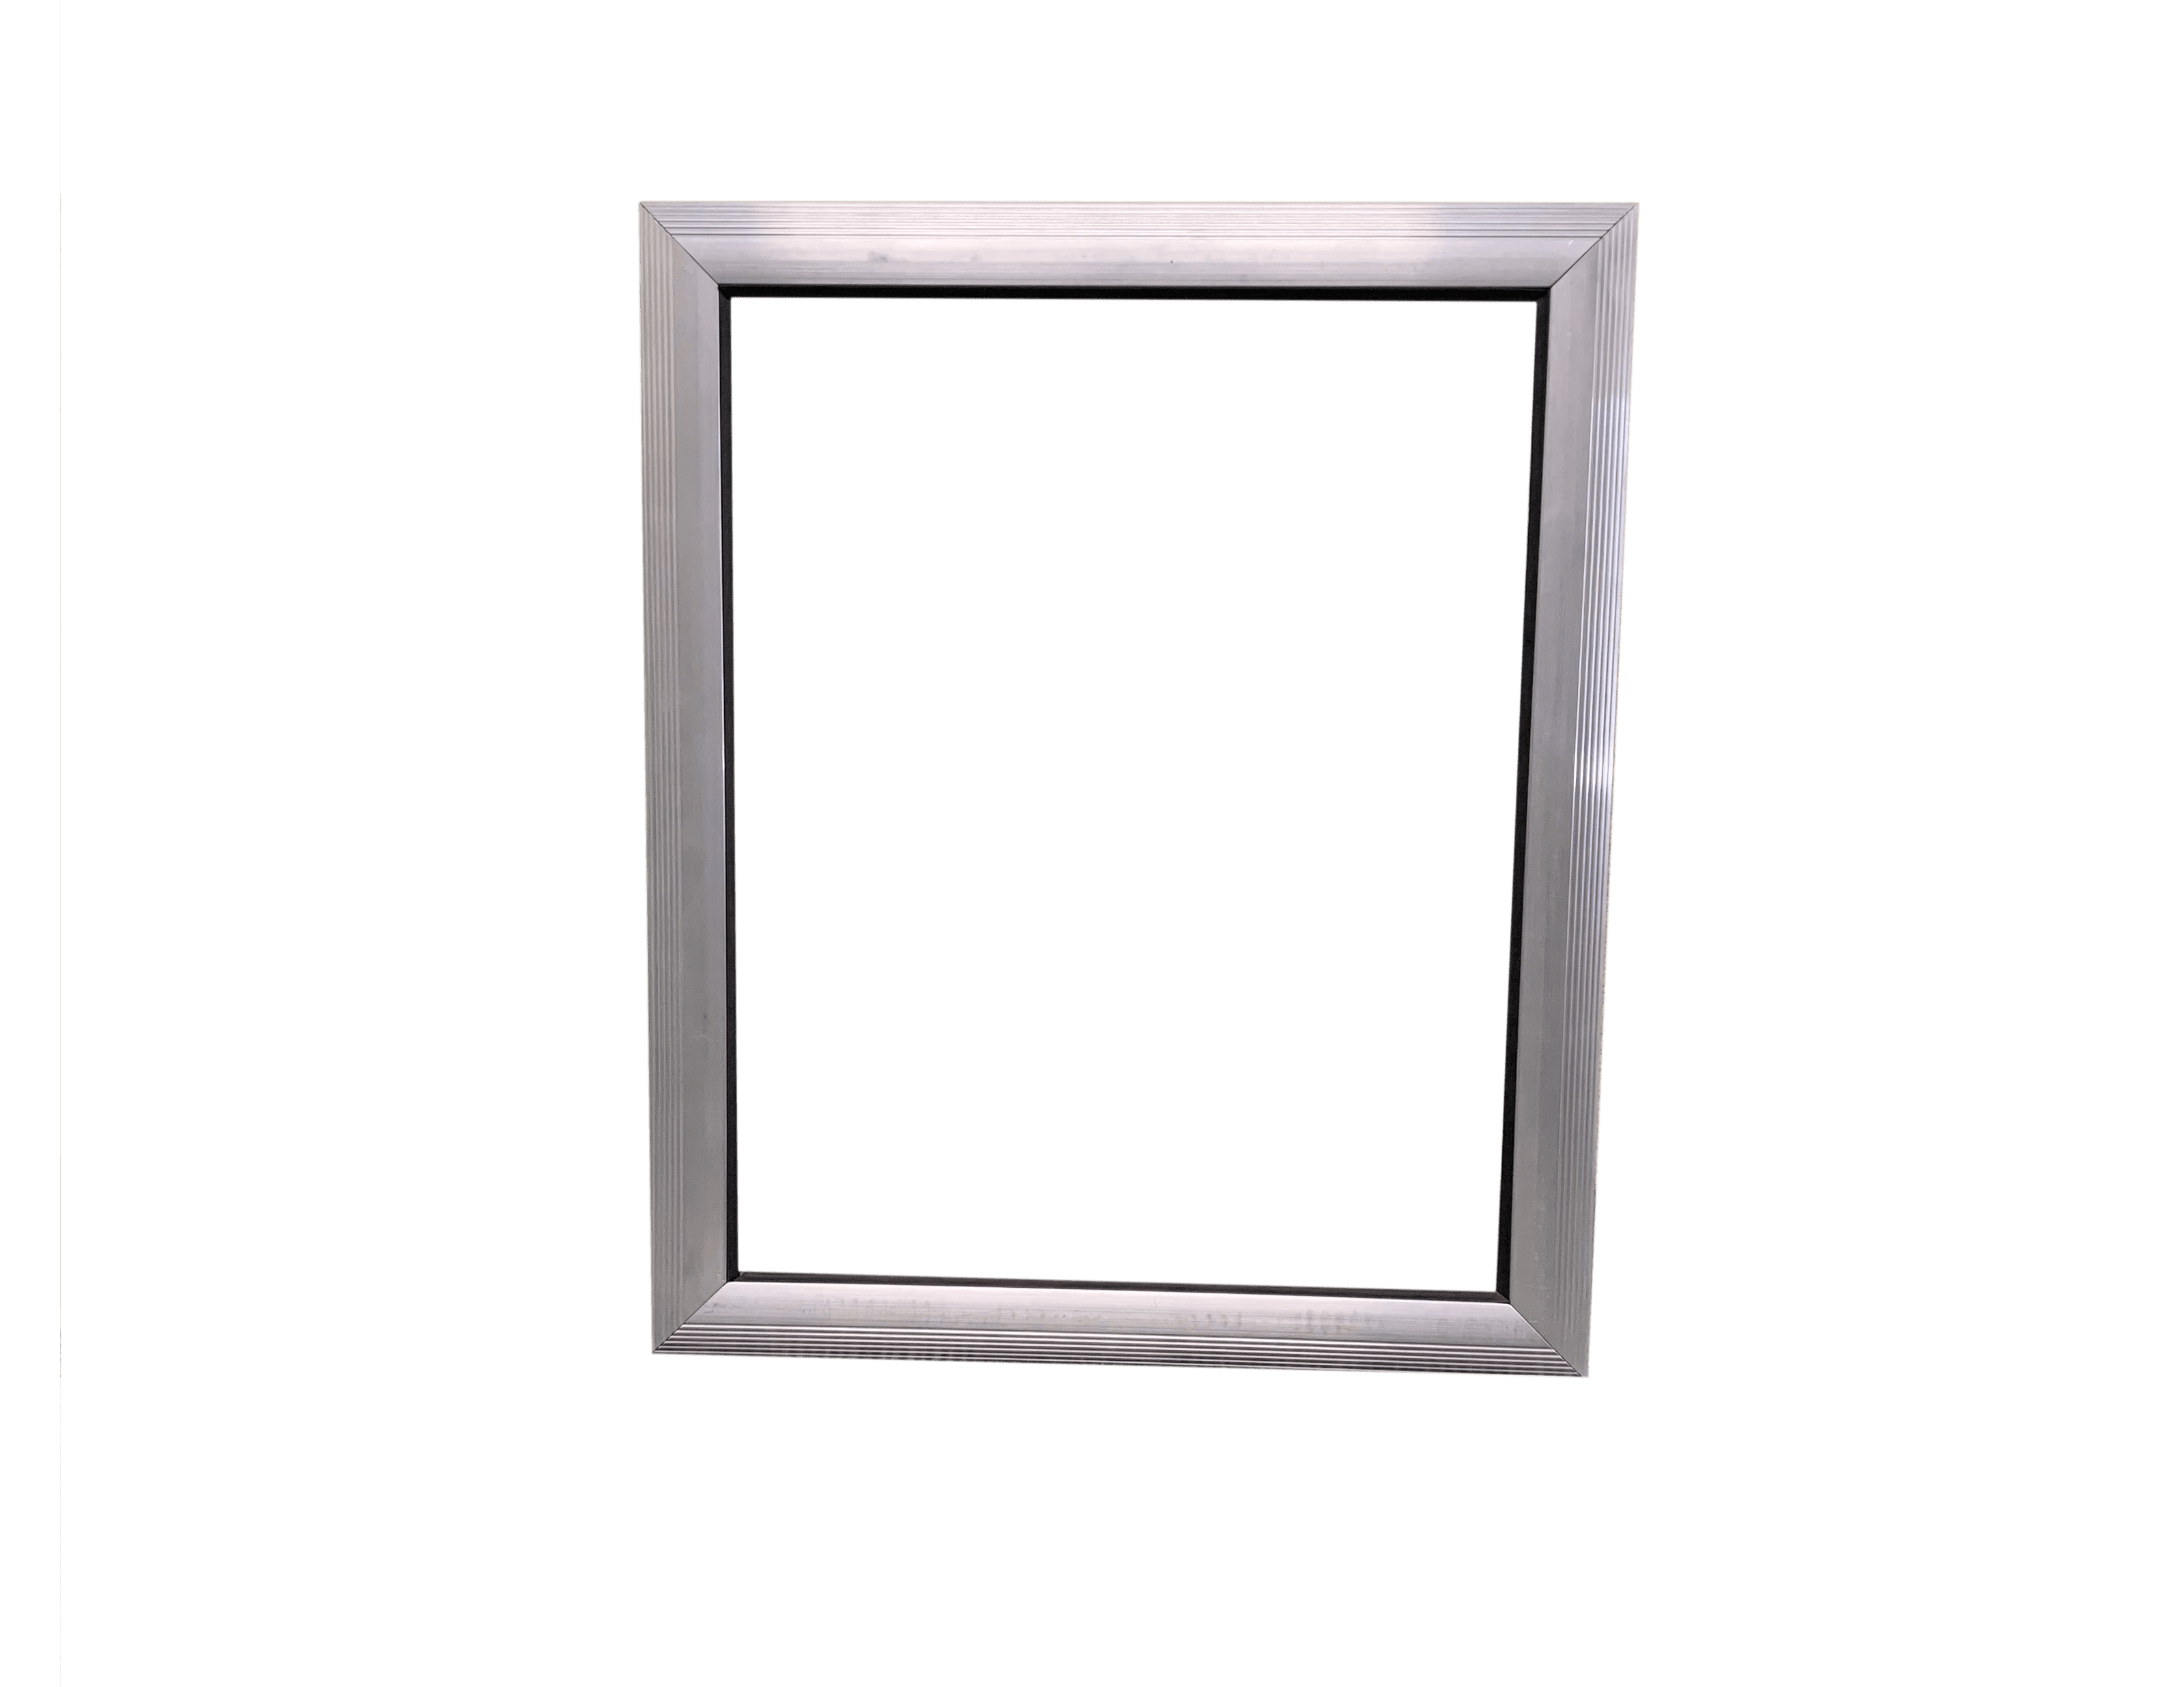 Saginaw Control SCE-AW6020SG Viewing Window - Extruded Aluminum Safety Glass, Height:64.00", Width:24.00", Depth:0.98", 